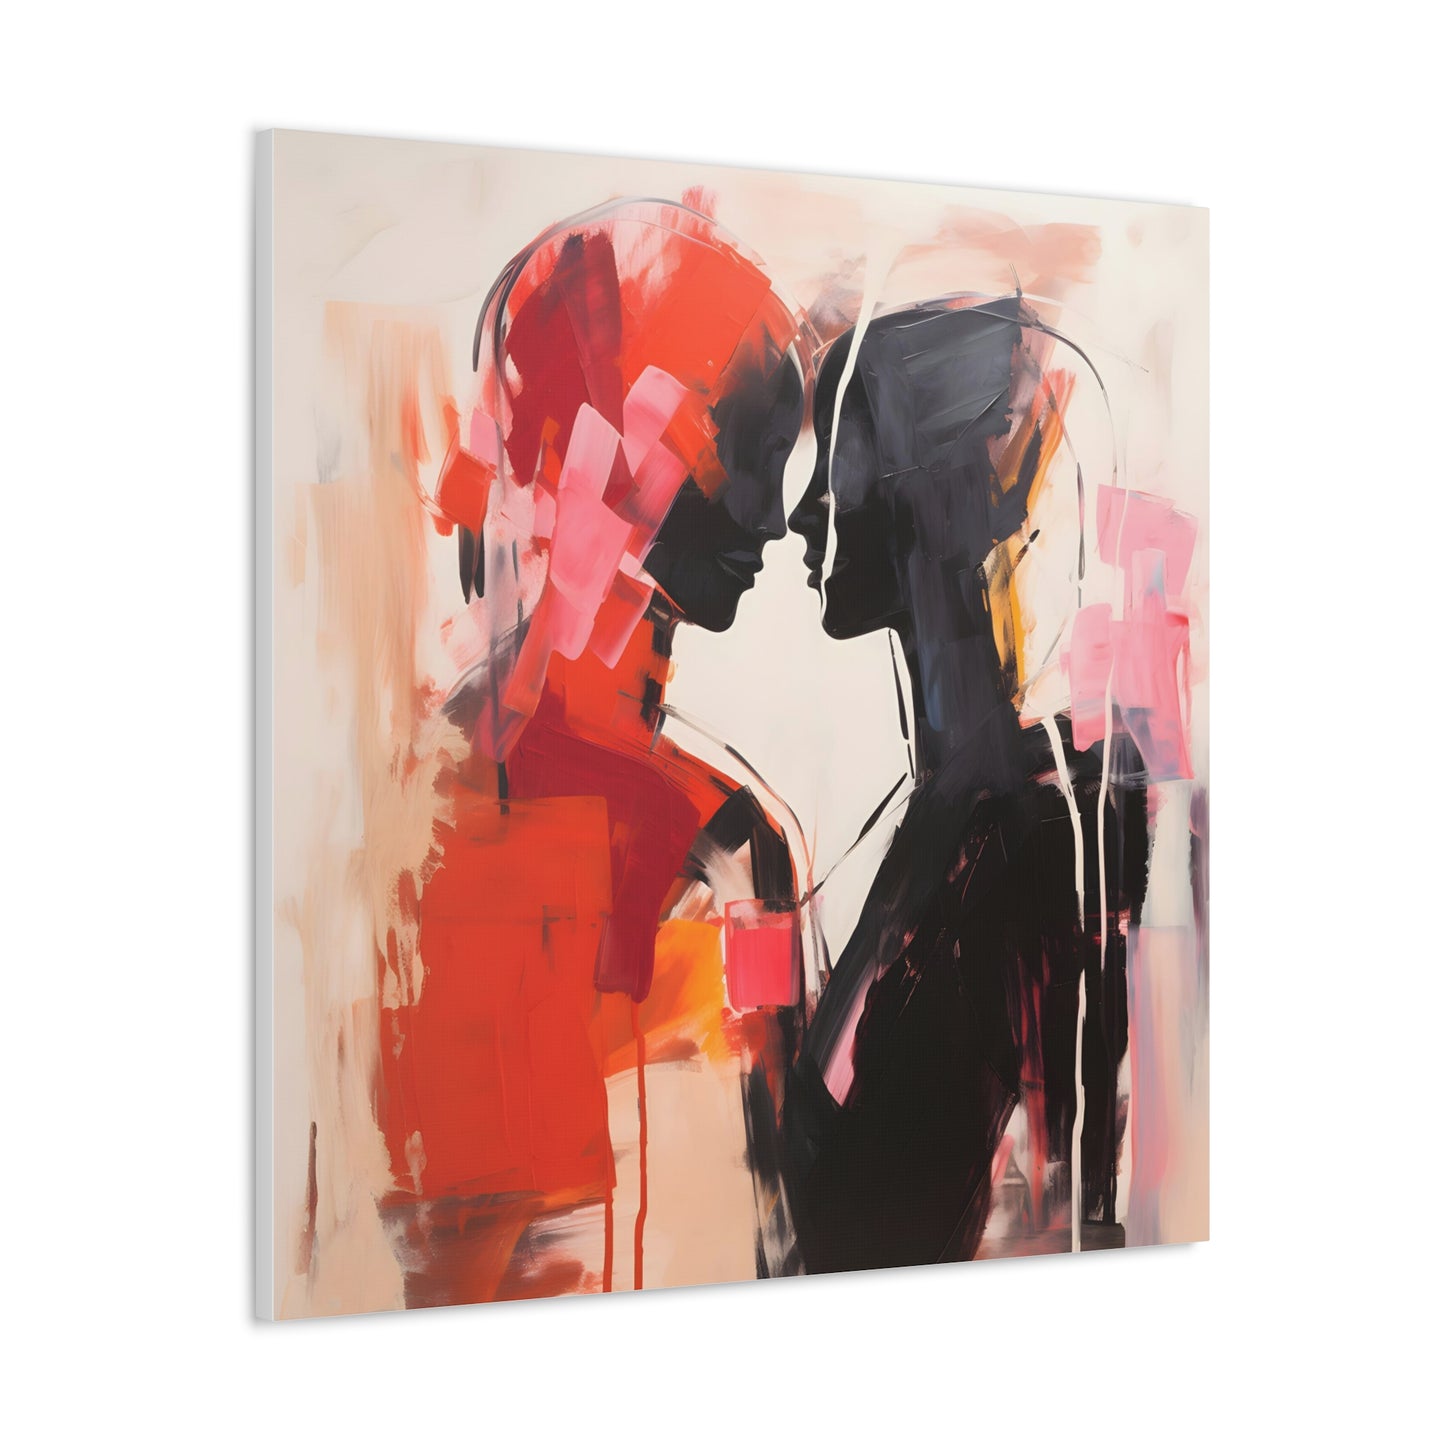 Leonora Kastner. Embrace of Hues. Exclusive Canvas Print